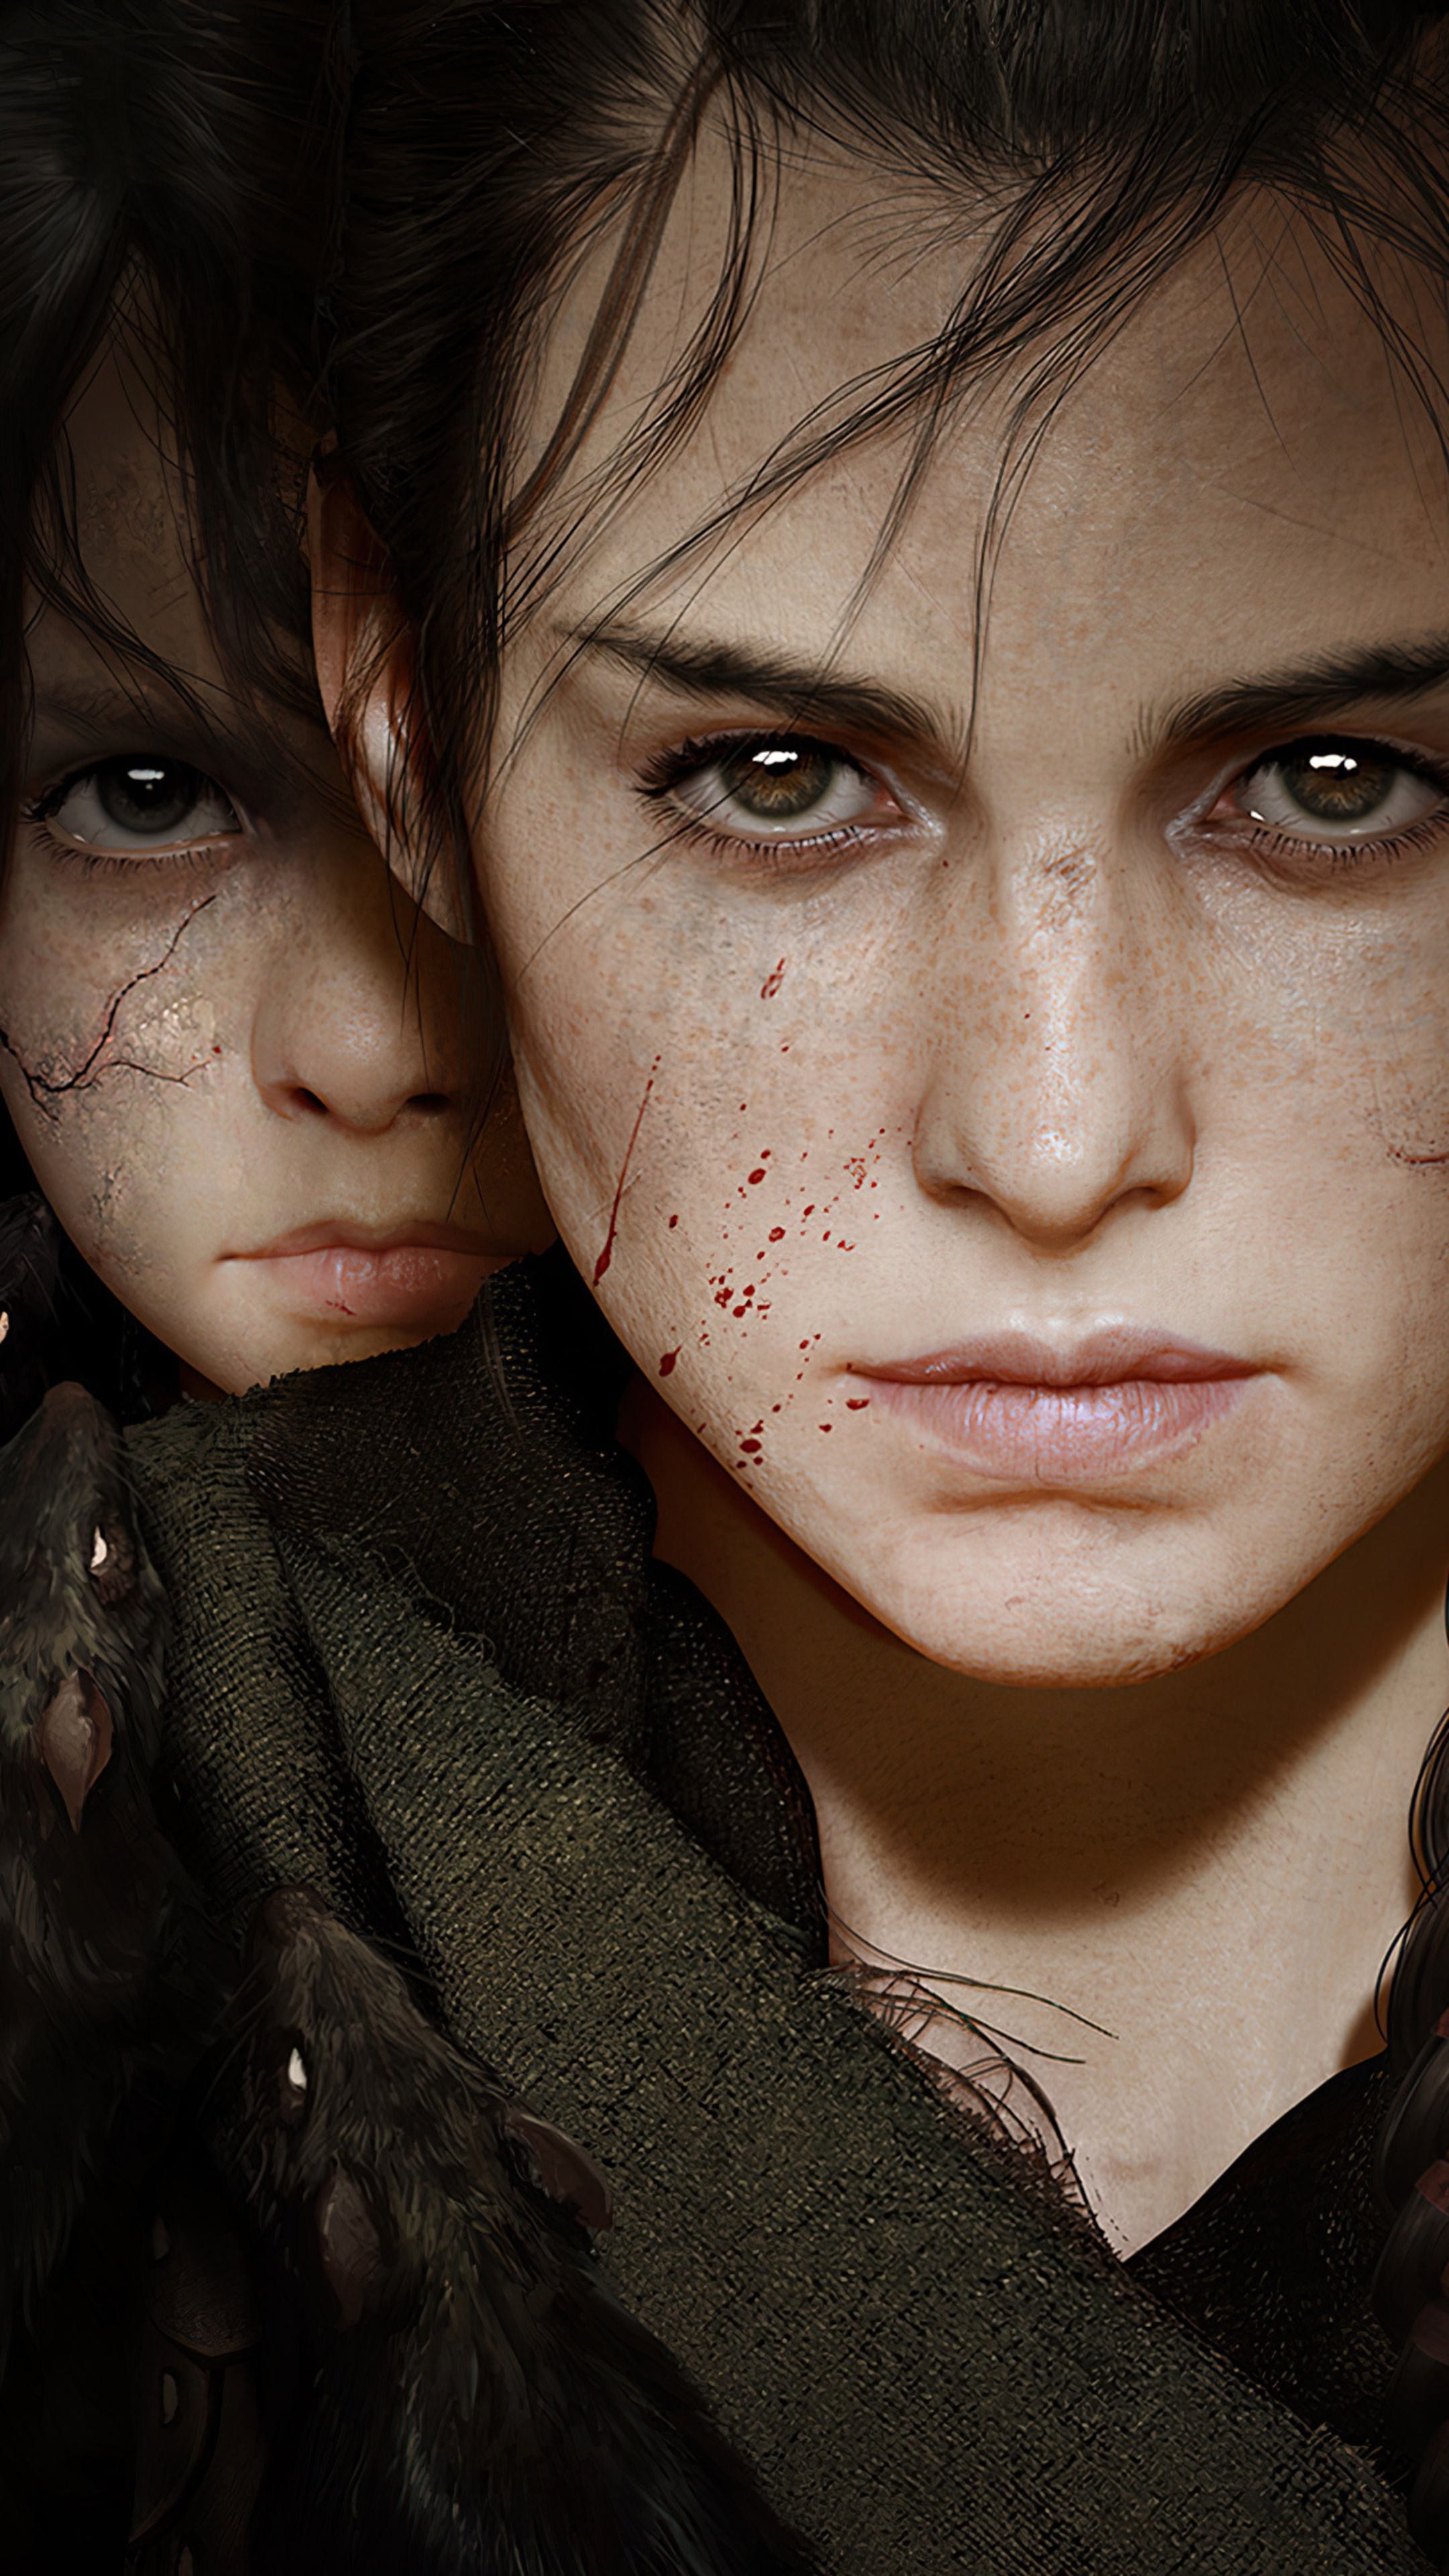 A Plague Tale: Requiem: Beatrice de Rune, Almost exclusively taking care of Hugo. 2160x3840 4K Wallpaper.